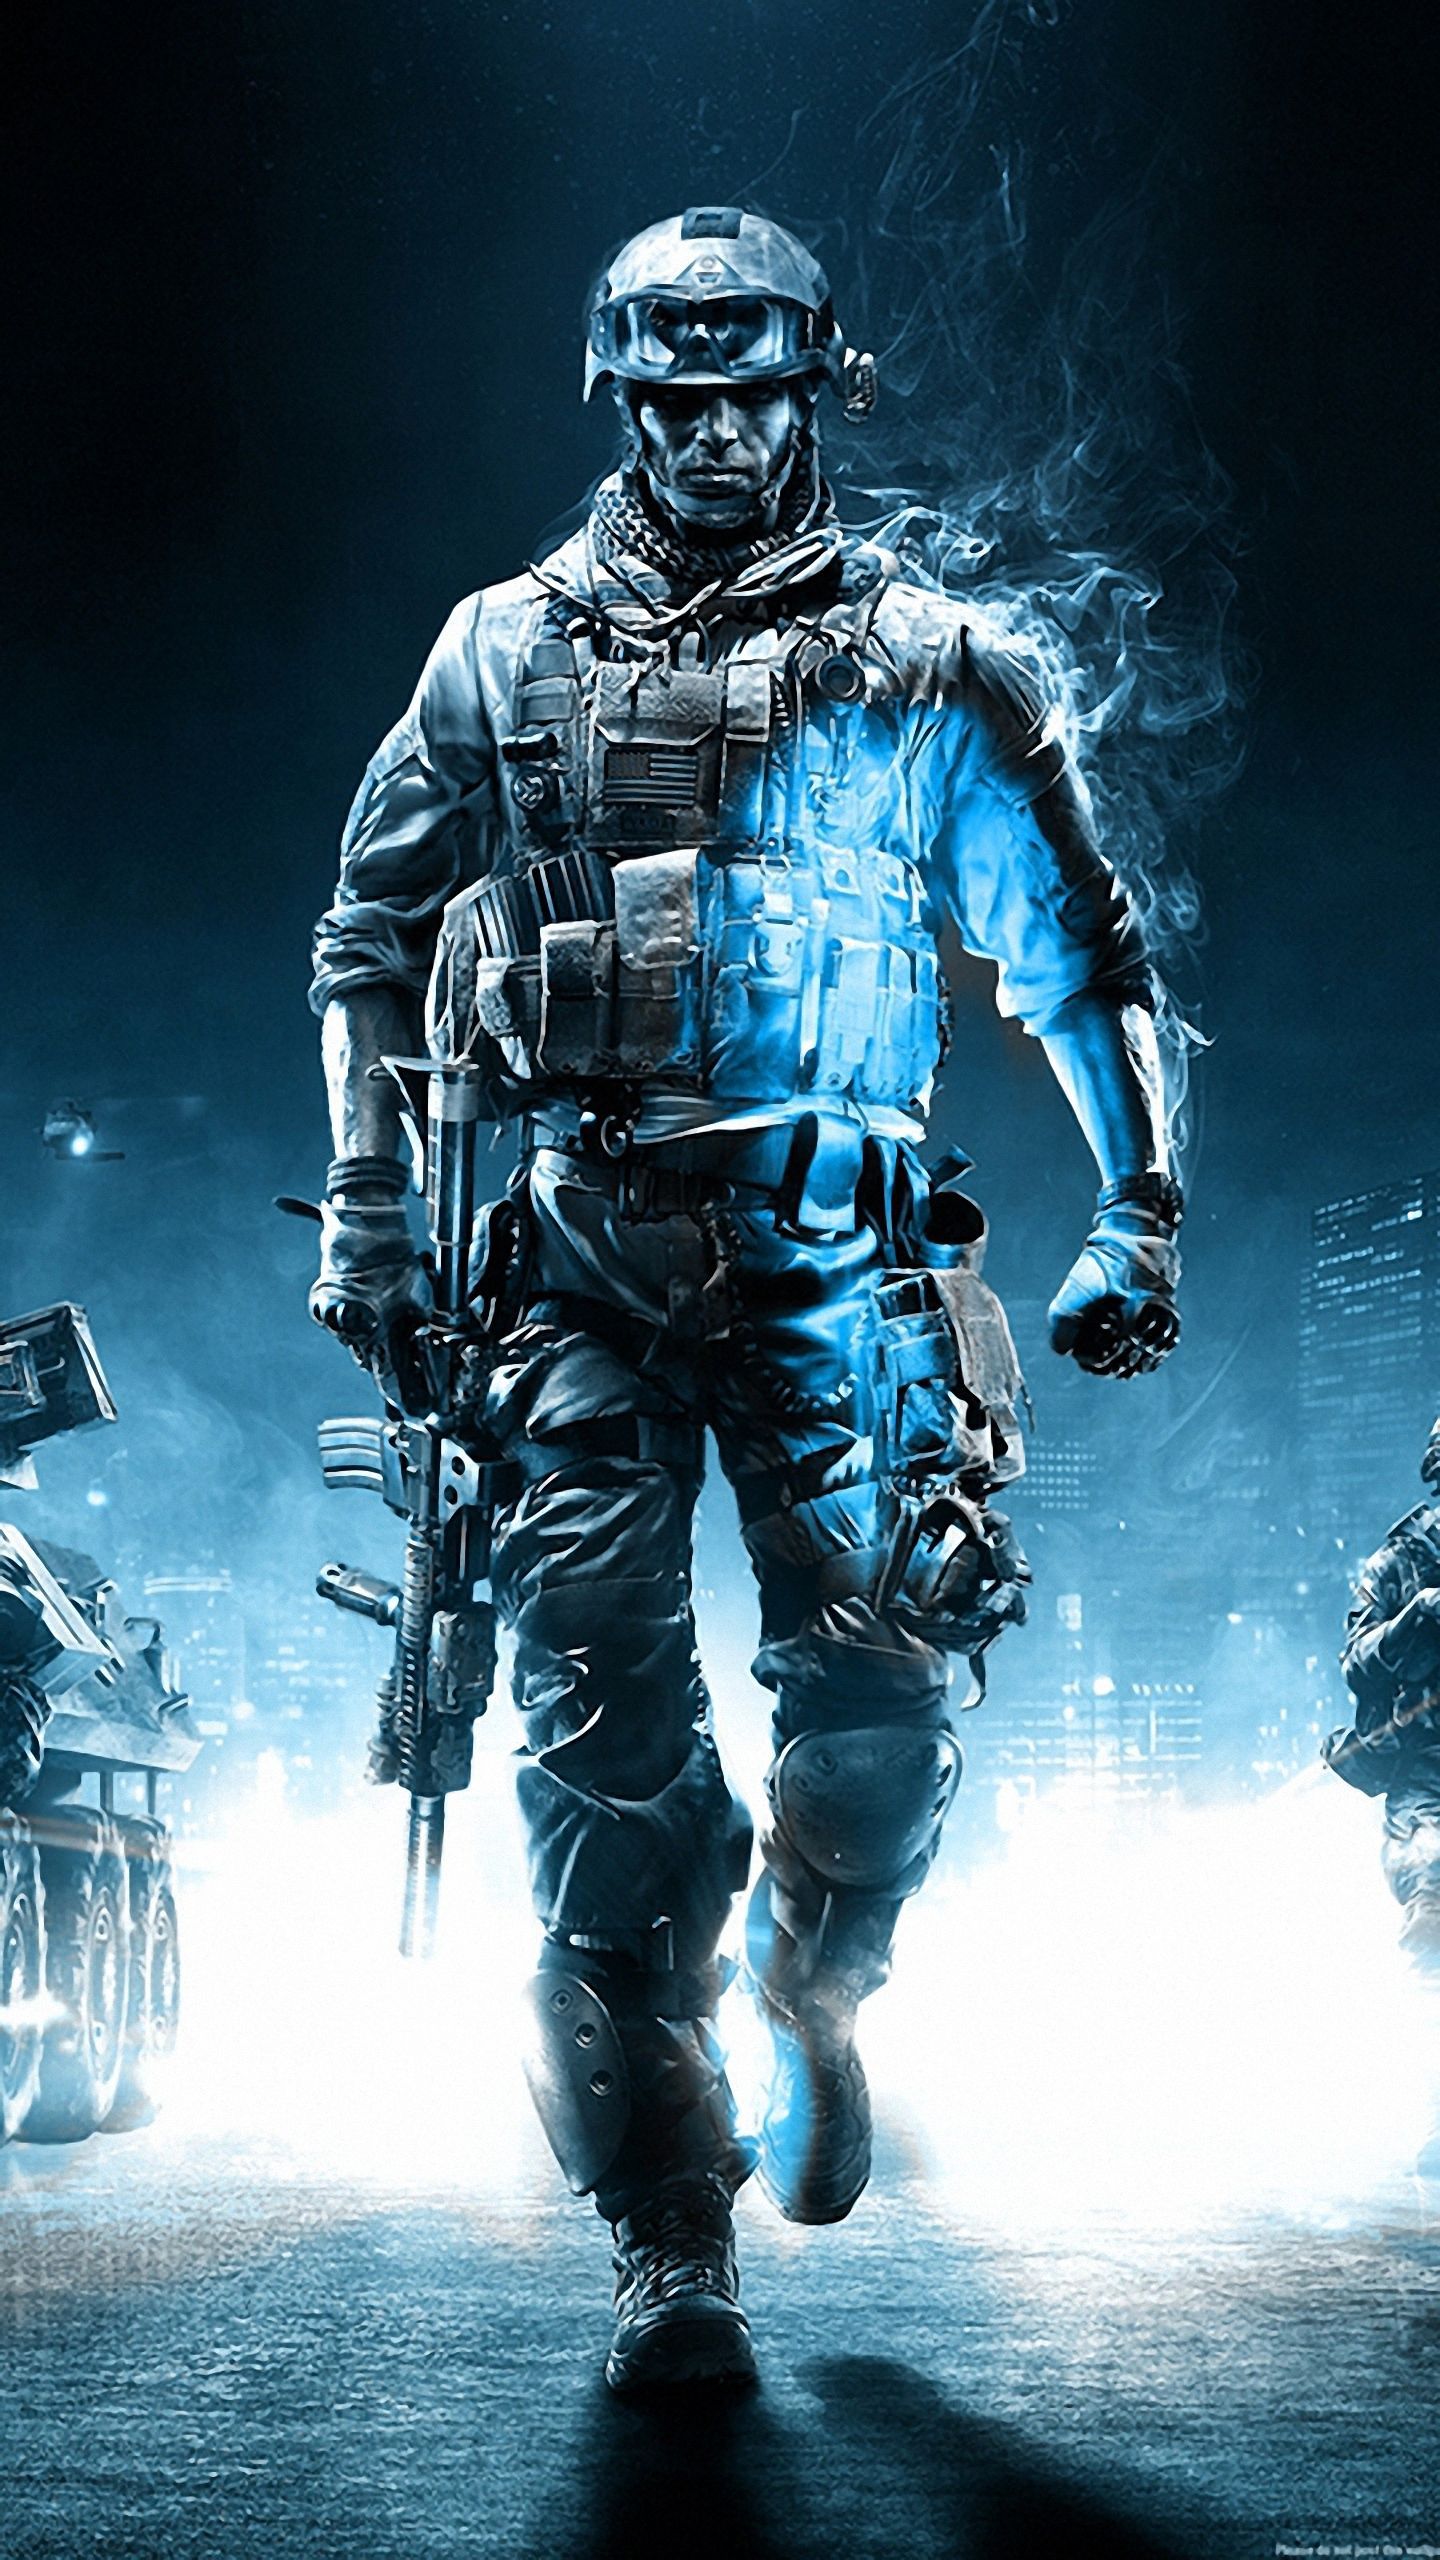 Battlefield 3 Action Game galaxy note 4 Wallpapers HD 1440x2560